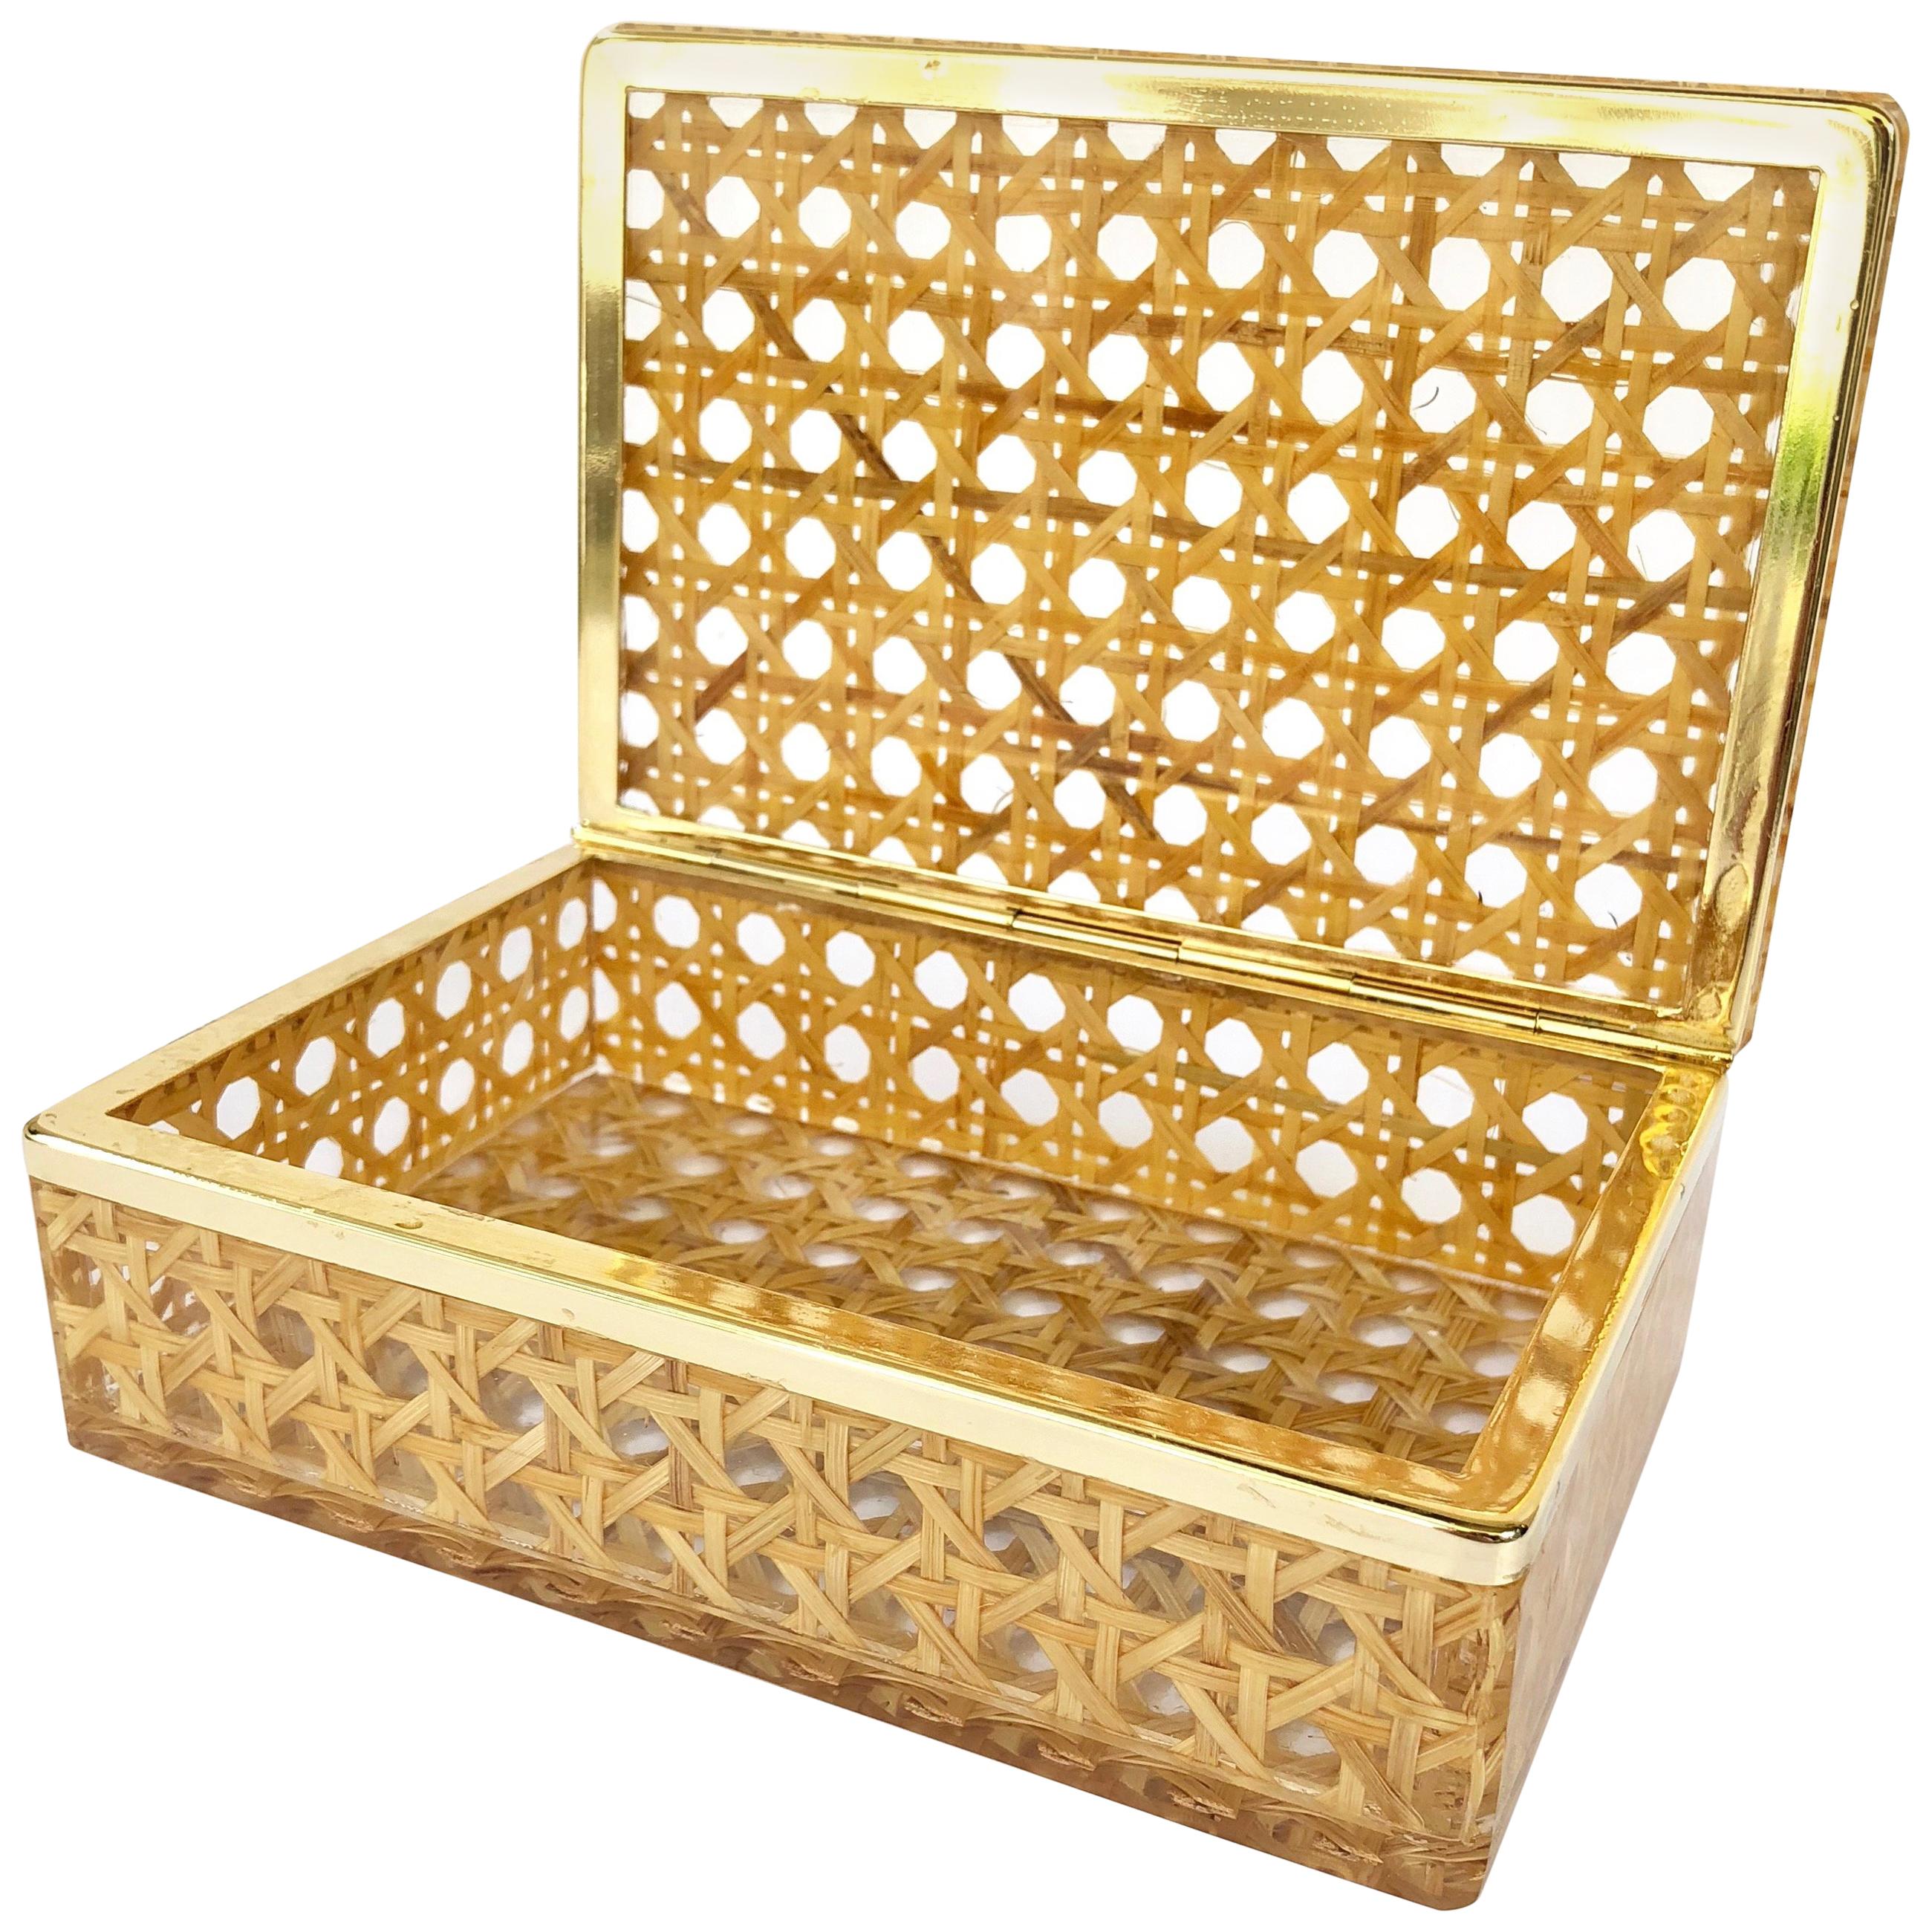 Box in Lucite, Wicker and Brass in Christian Dior Style 1970 